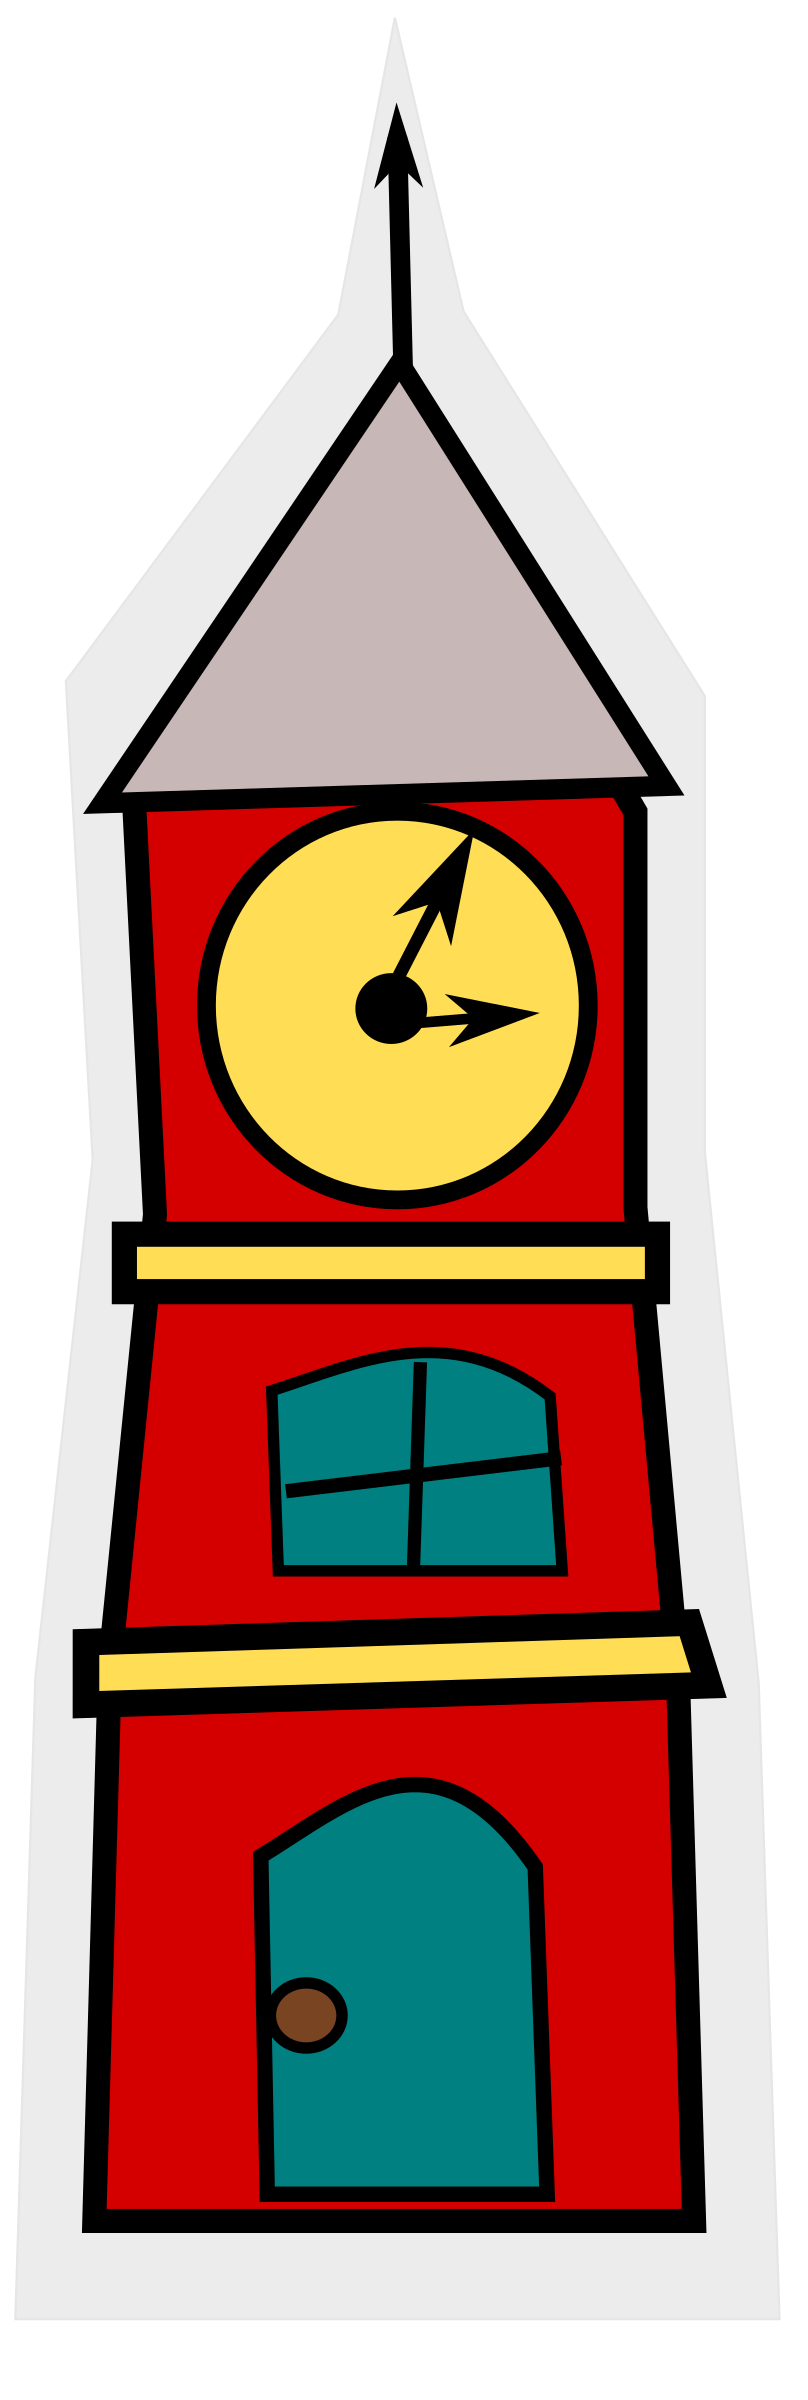 Cartoon Tower With A Clock